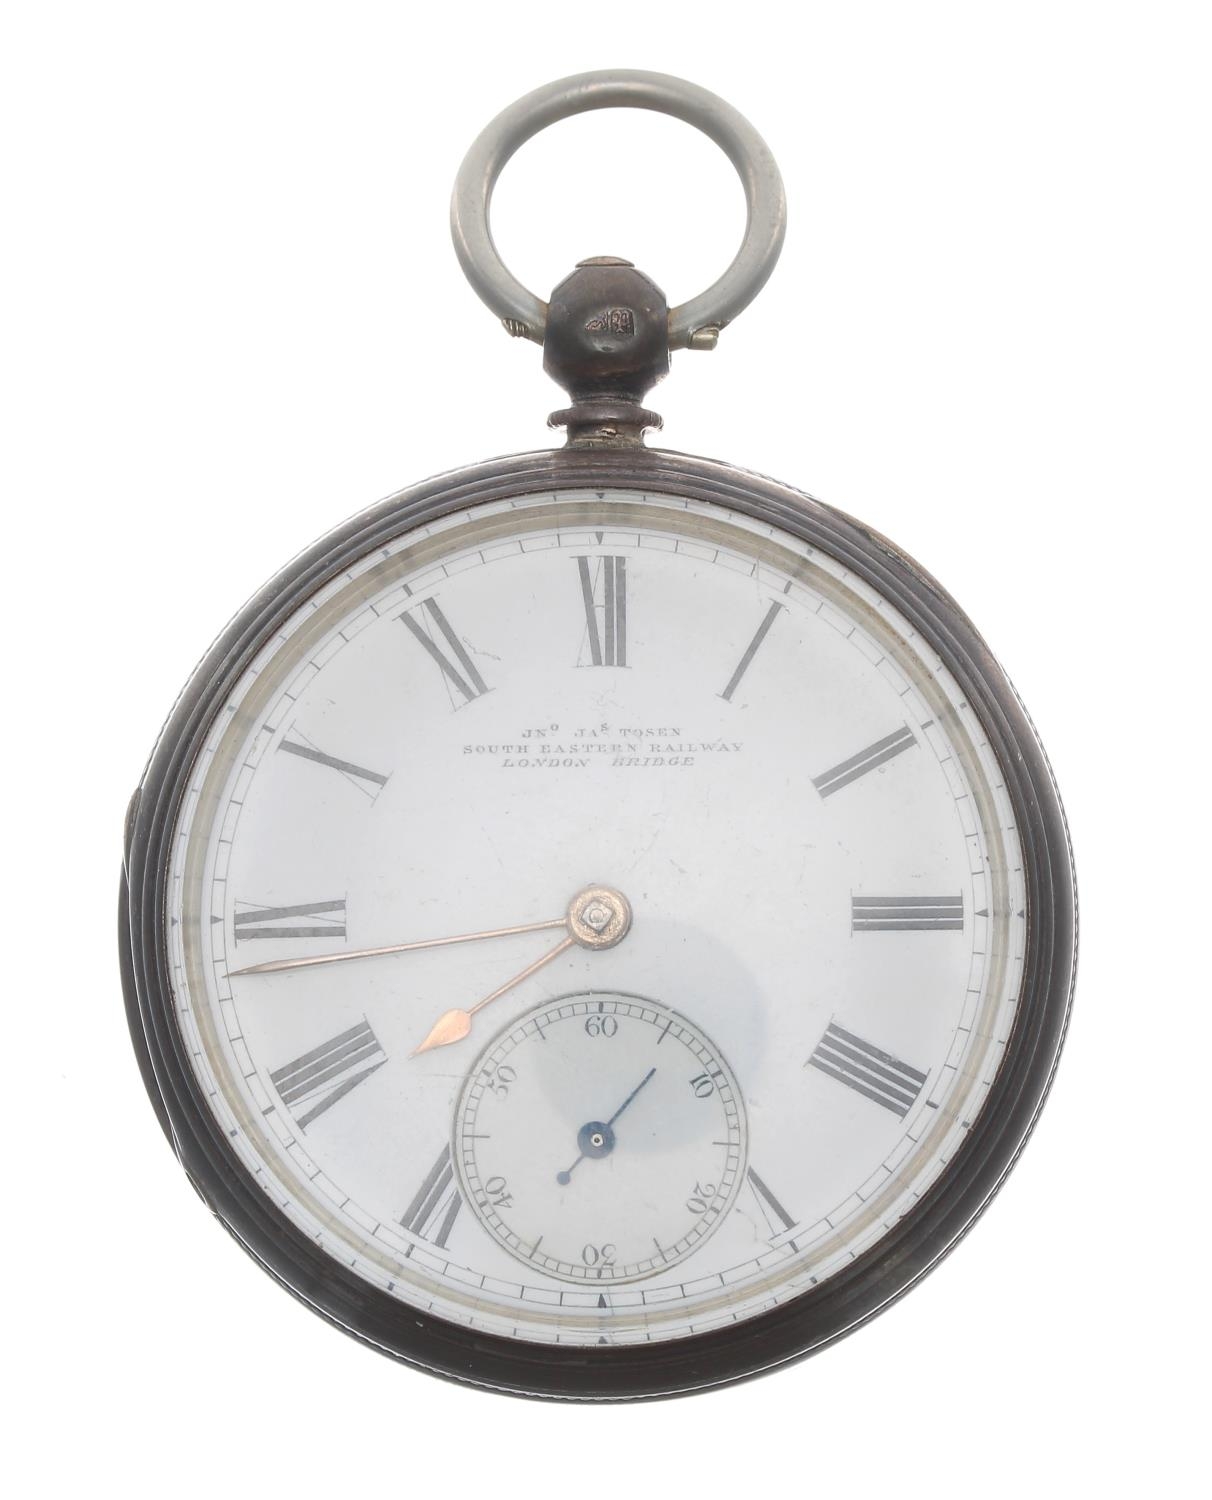 Victorian silver fusee lever pocket watch of Railway Interest, London 1870, the movement signed